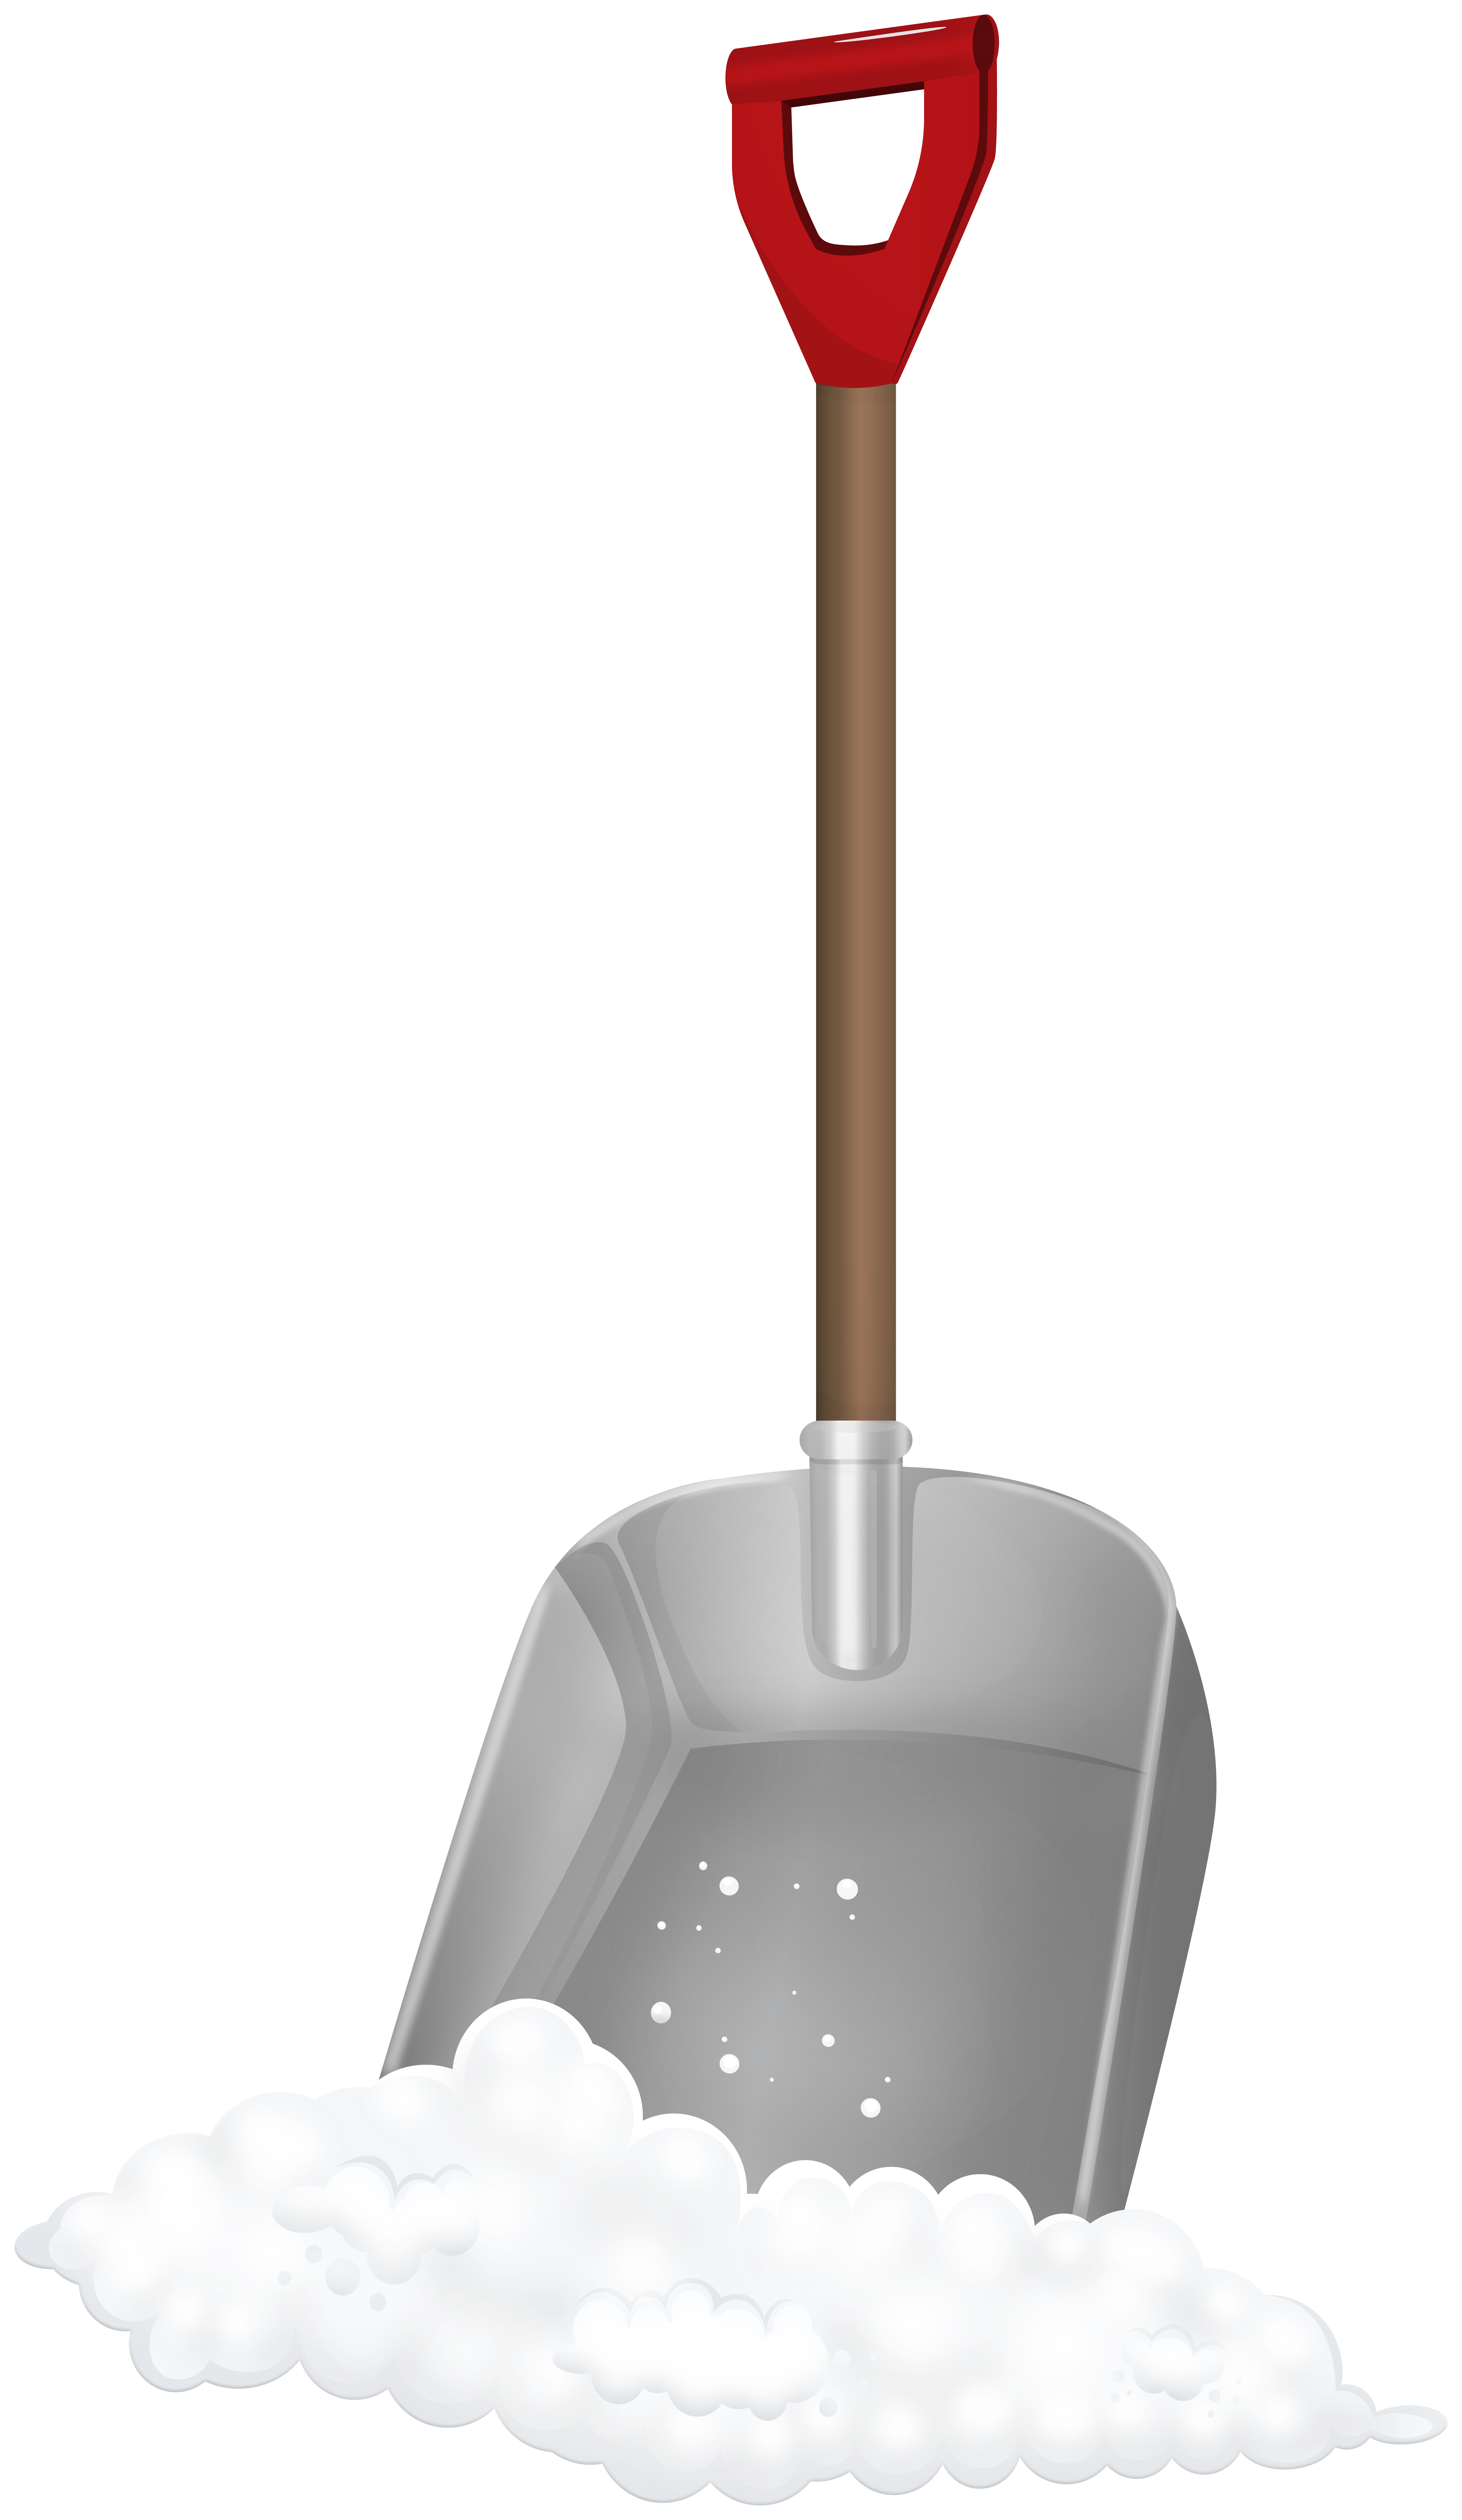 https://gallery.yopriceville.com/var/albums/Free-Clipart-Pictures/Winter-PNG/Shovel_with_Snow_PNG_Clipart.png?m=1604660244